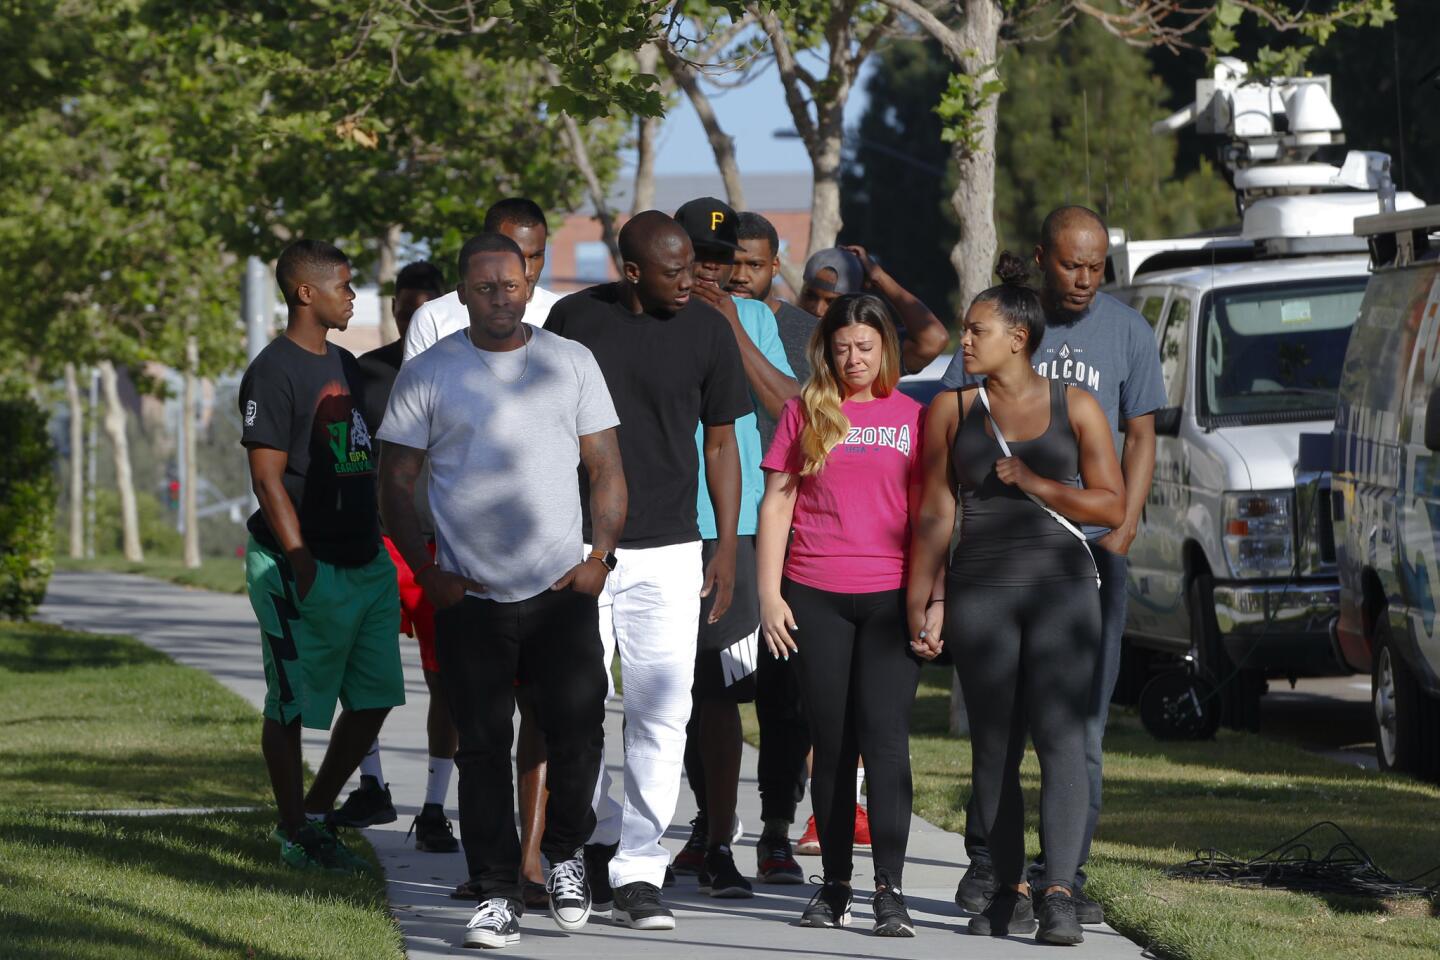 Walking to their press conference, victims who were at the shooting during a birthday party celebration last Sunday at the La Jolla Crossroads apartments, called for a press conference to speak with the news reporters.